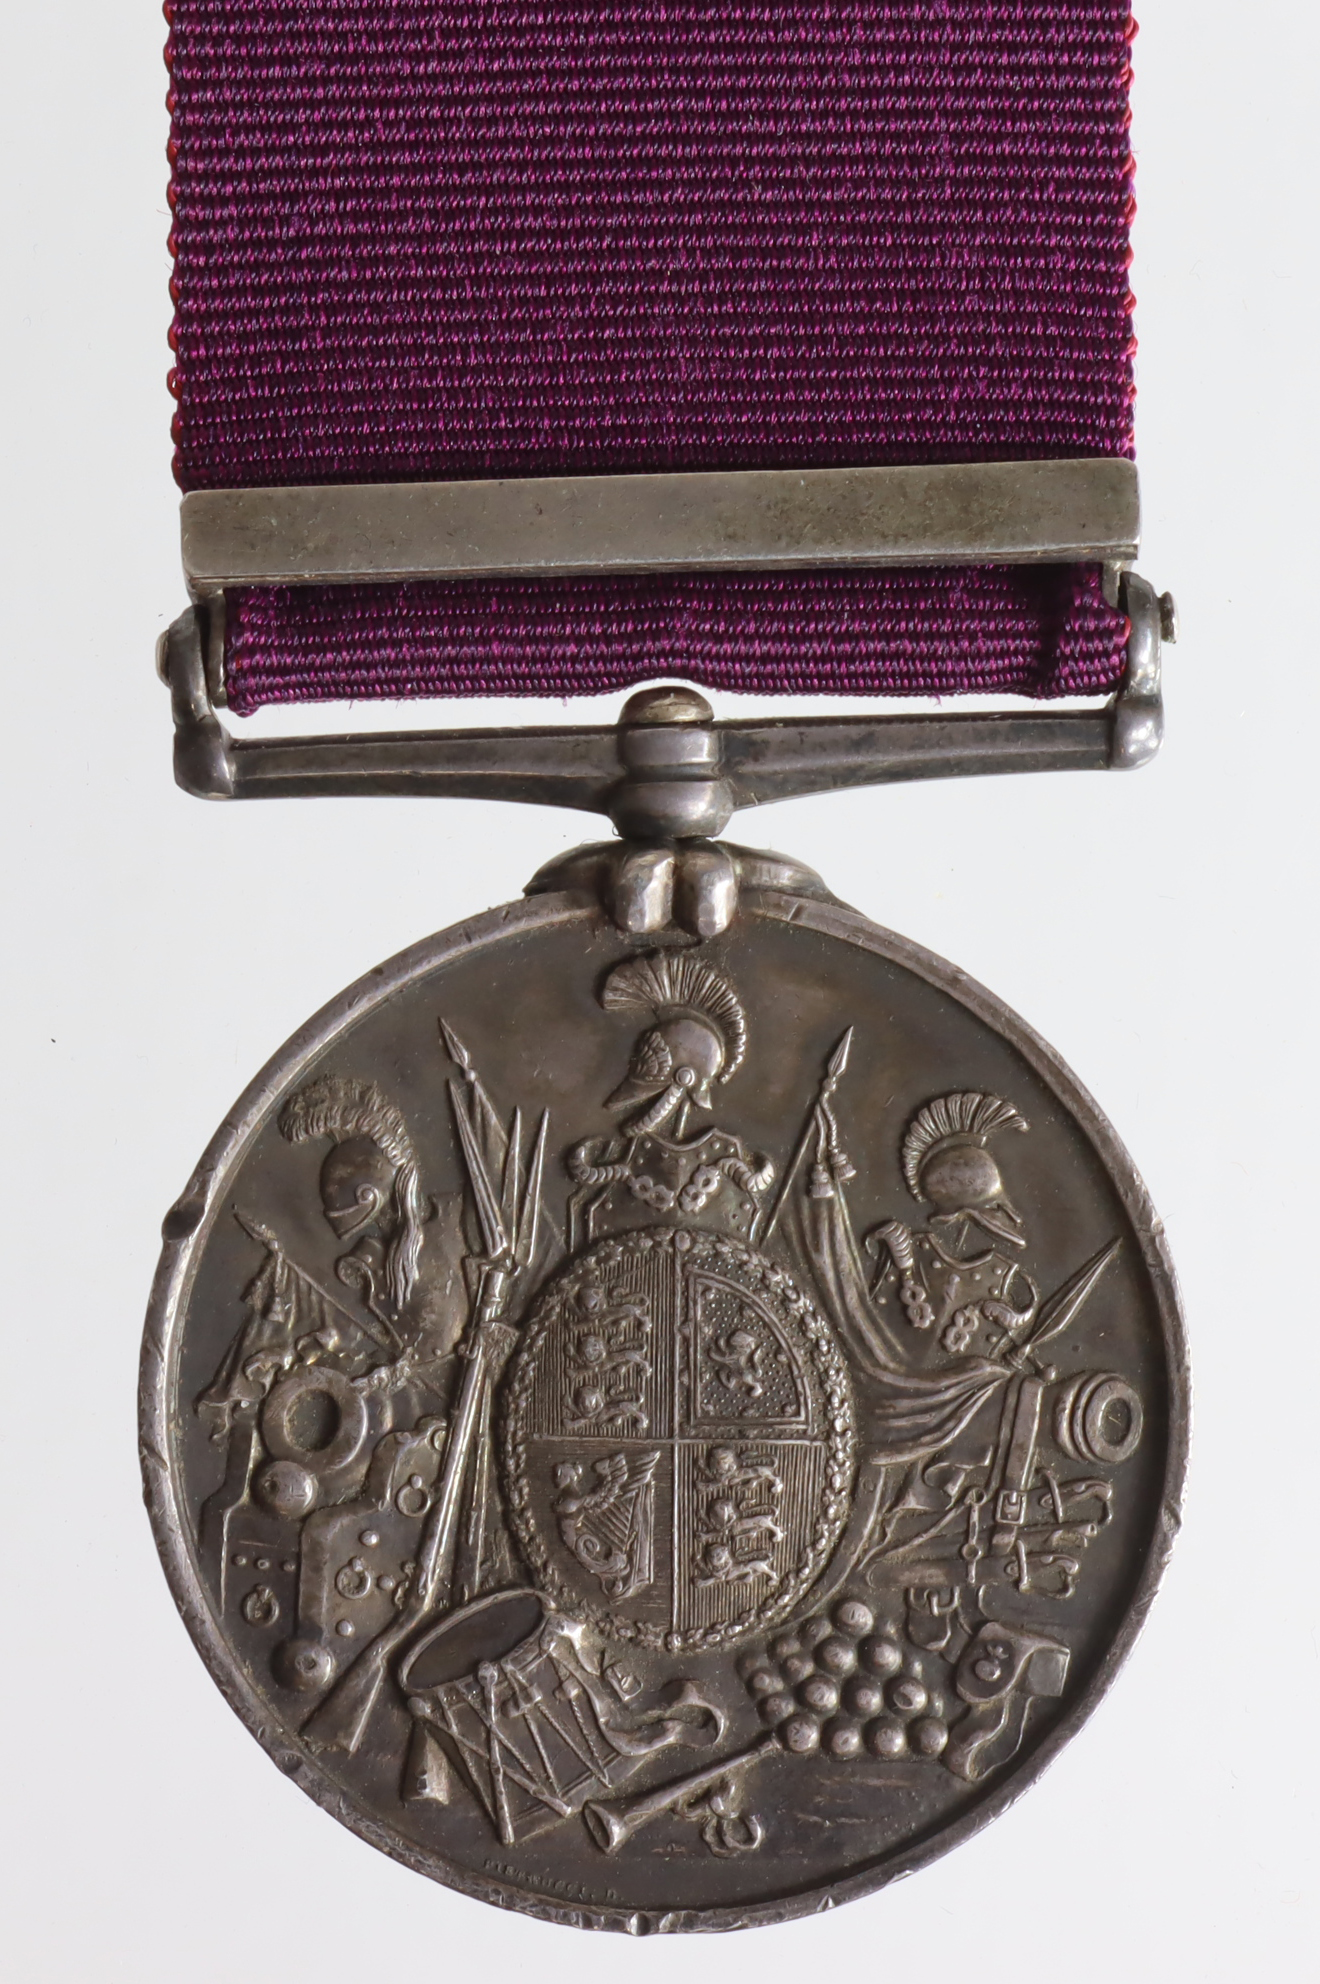 Army LSGC Medal QV named (J.Andrews, T. Serj. Major 11th Hussars, 1845). With replacement straight